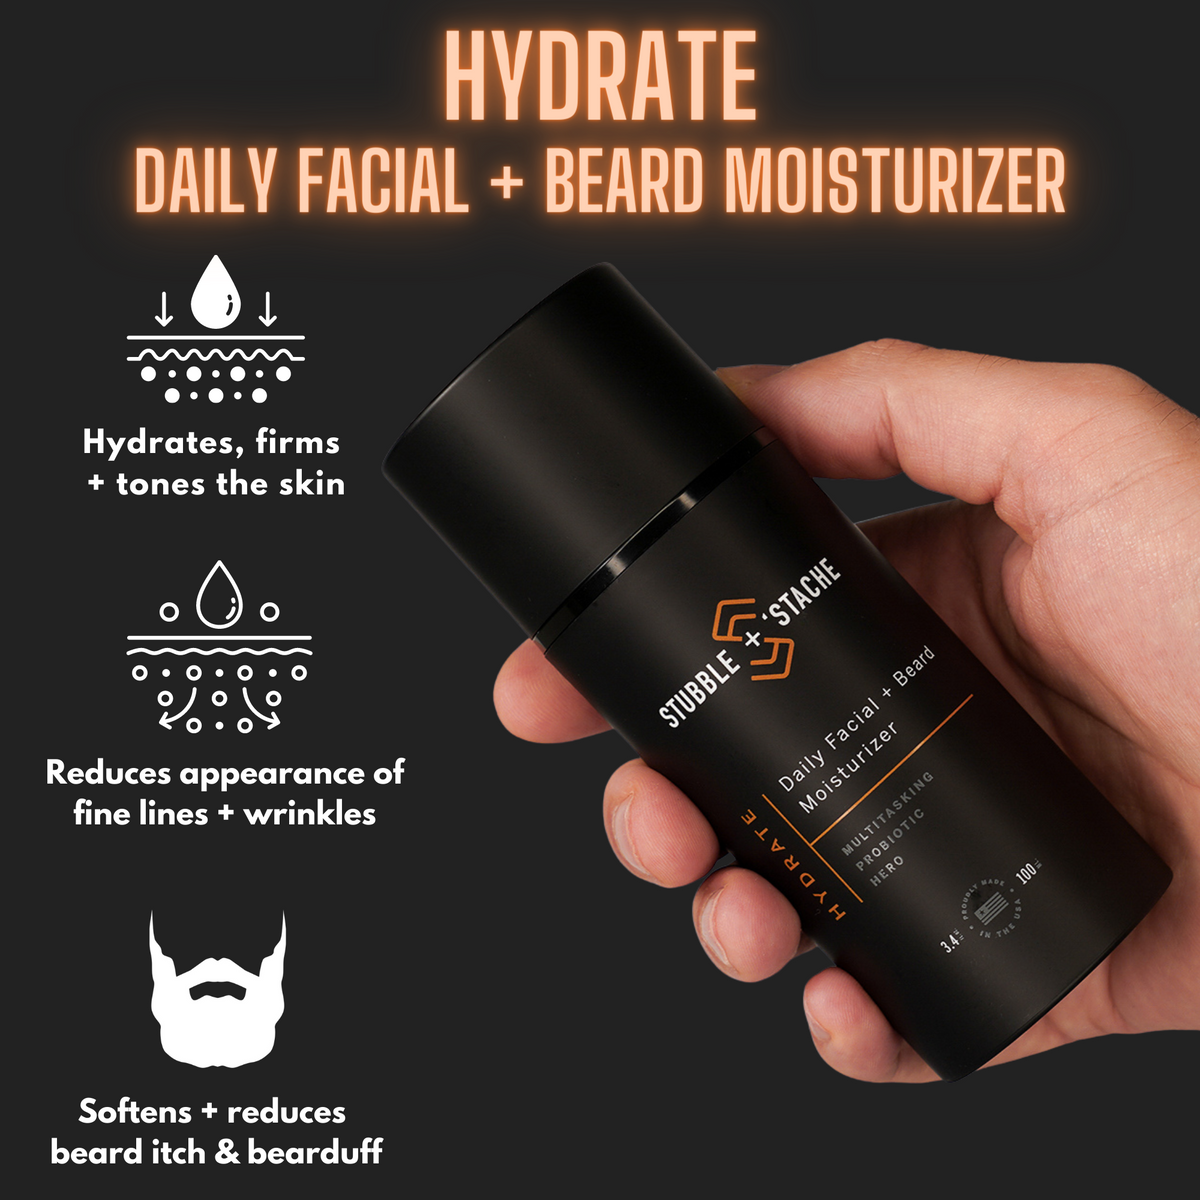 Hydrate Daily Facial Moisturizer and beard moisturizer for men reduces appearance of fine lines and wrinkles reduces beard itch